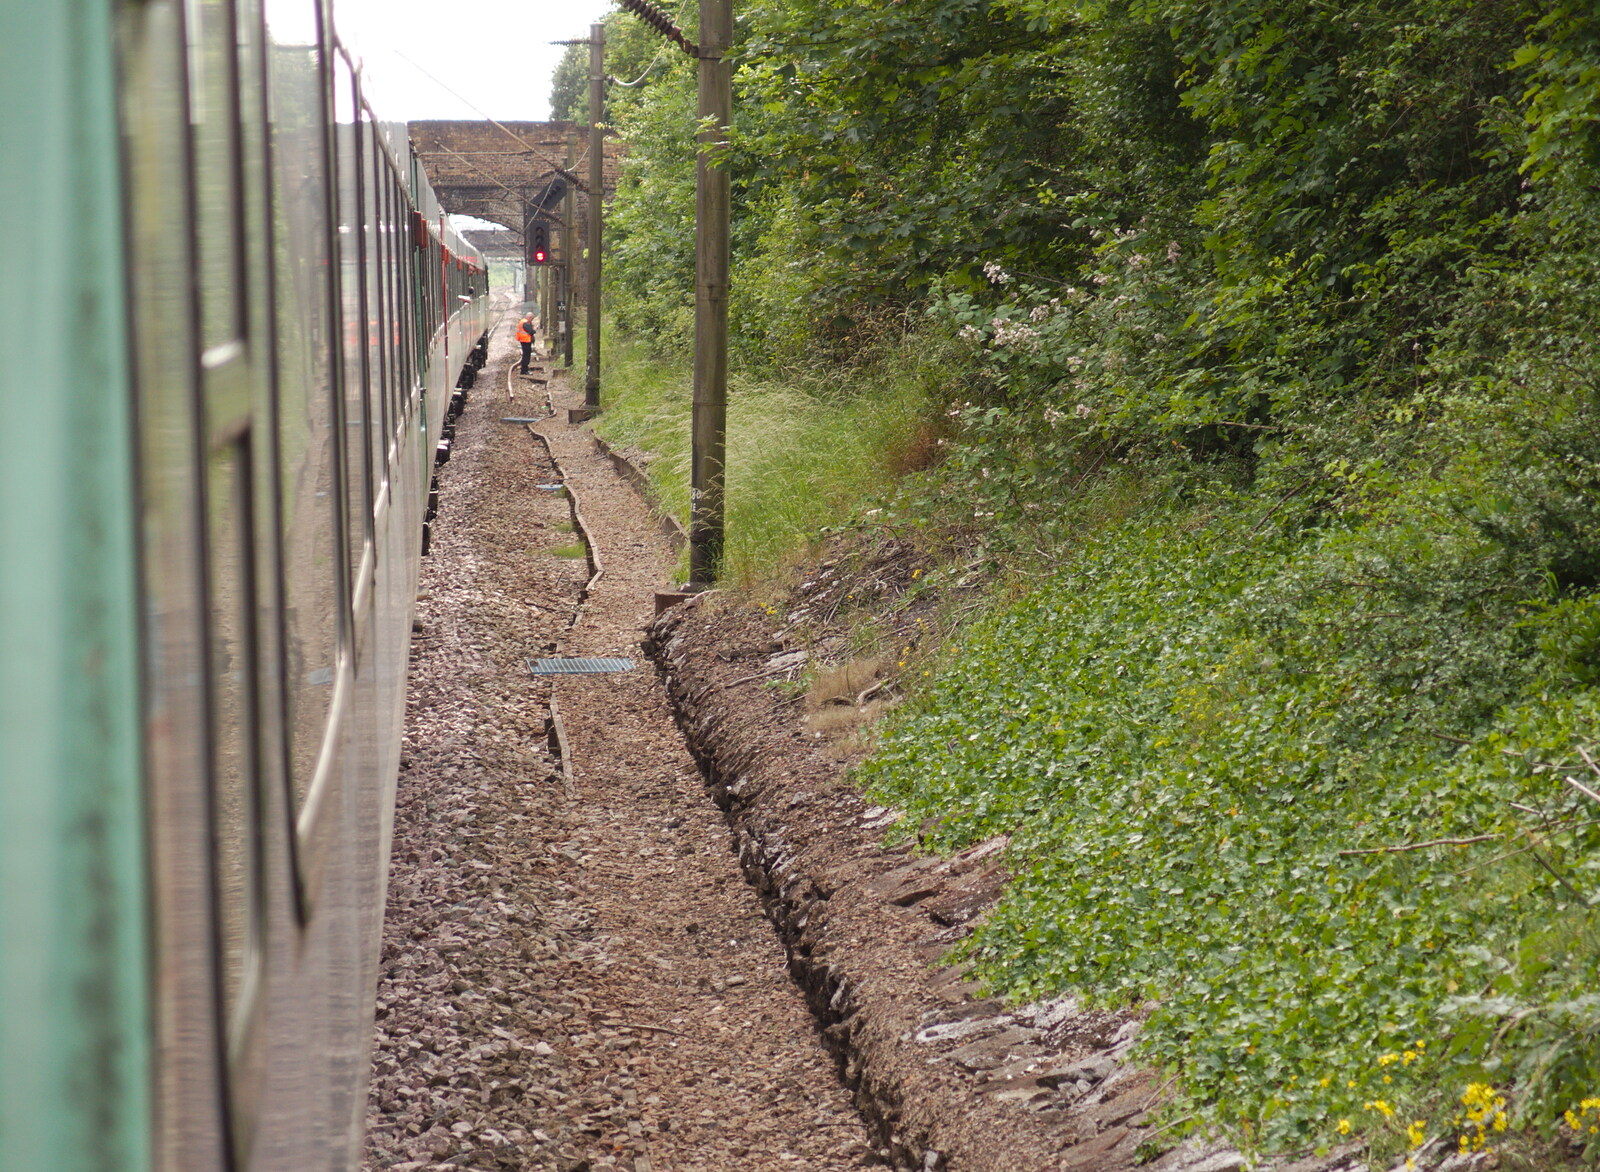 The driver's down the other end of the train from Railway Hell: A Pantograph Story, Chelmsford, Essex - 17th June 2014